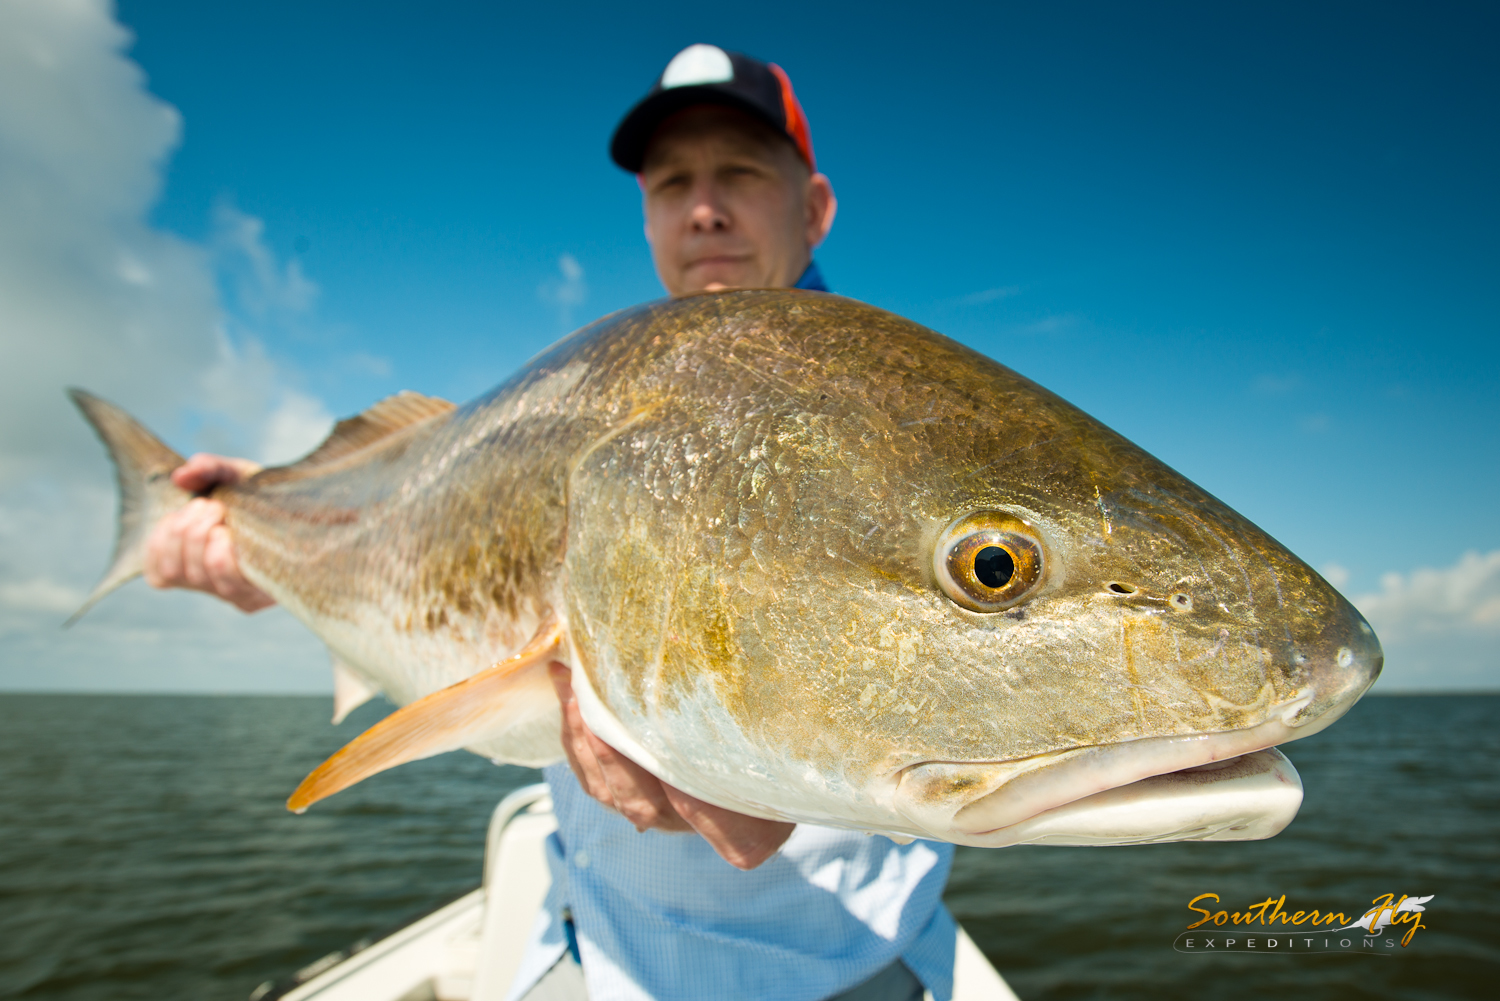 Fly Fishing New Orleans Redfish Charter Guide - Southern Fly Expeditions 